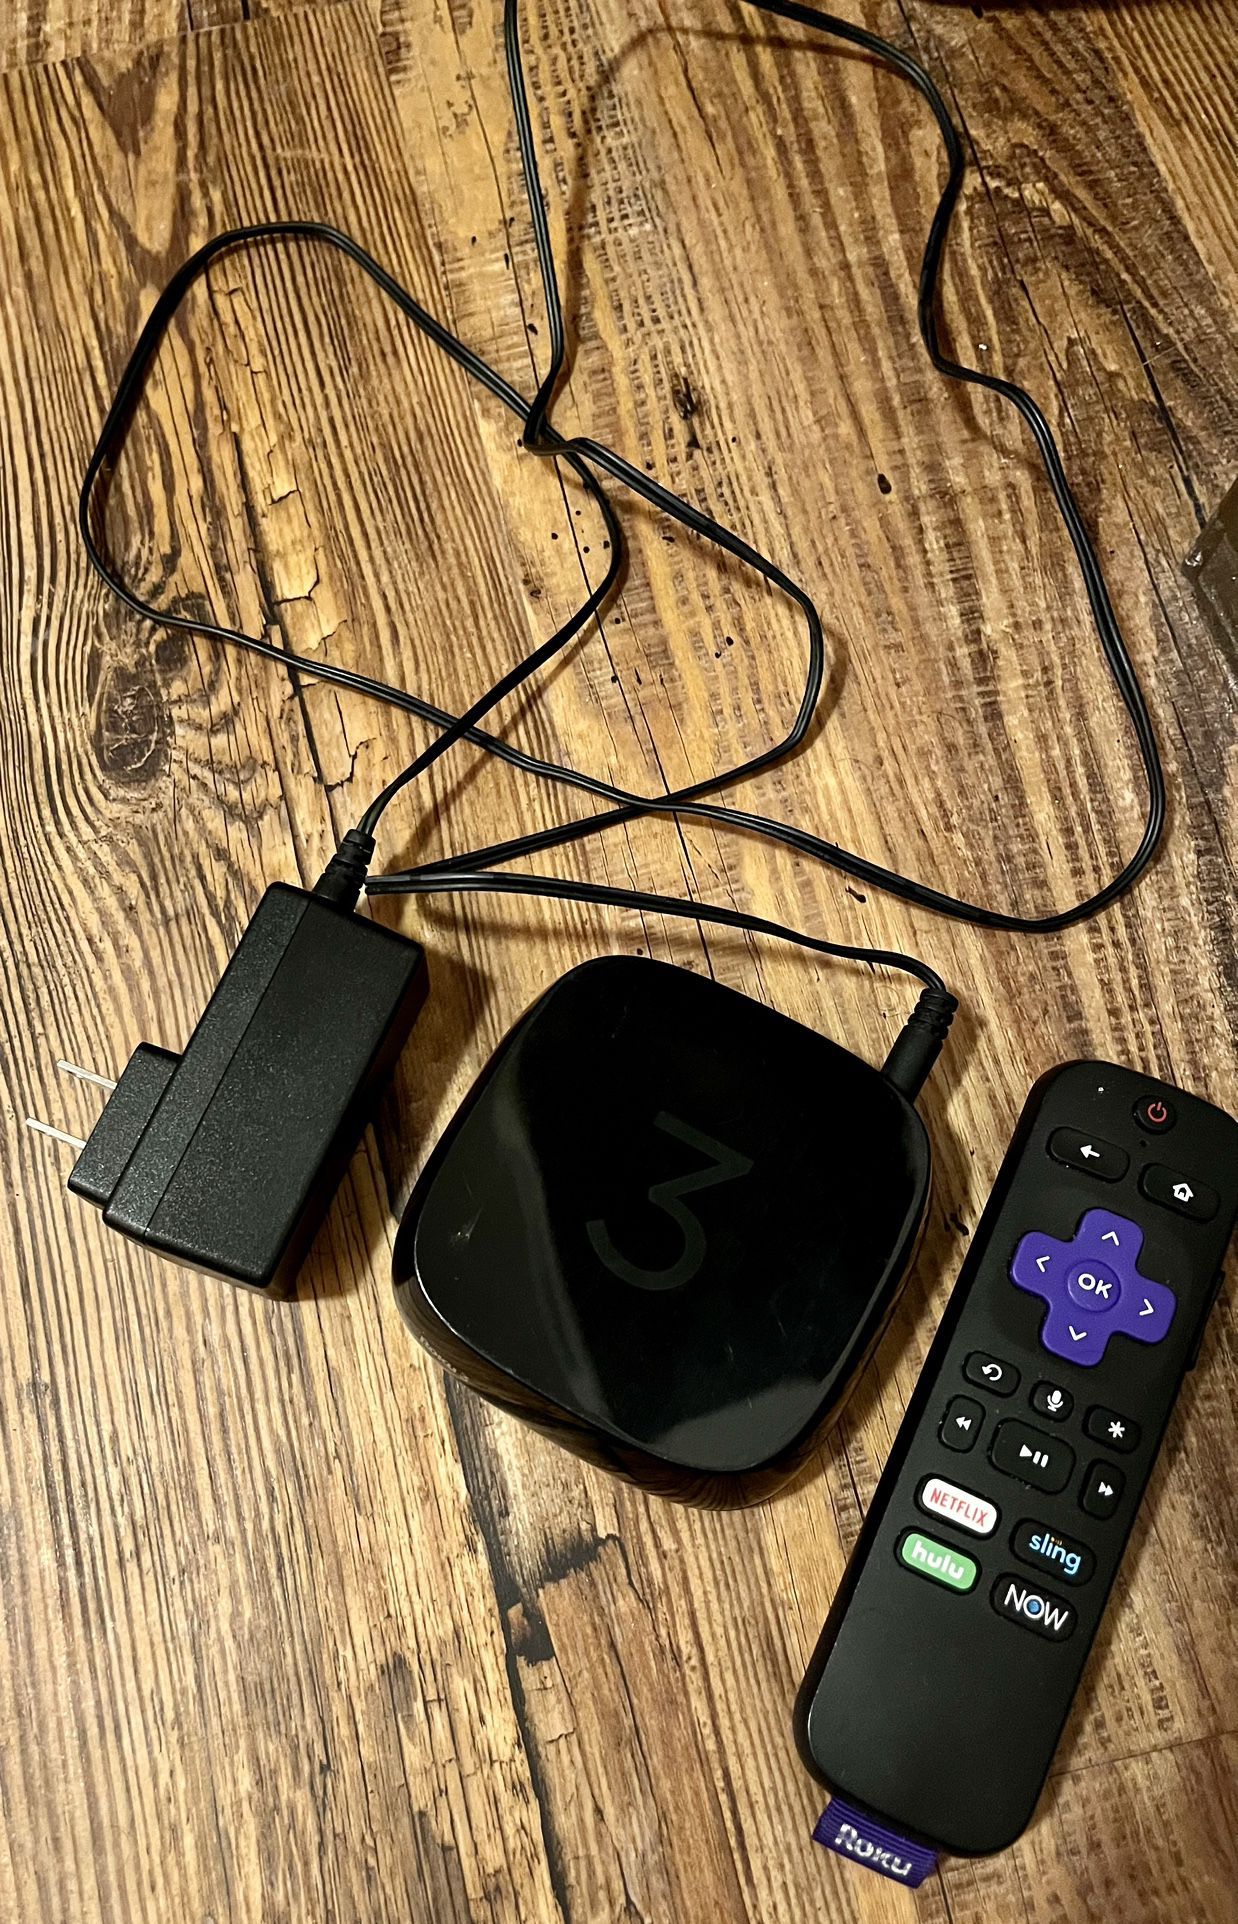 Roku 3 FHD (3rd Generation) Media Streamer 4230X1 Black and Power Supply. Need To Purchase New Remote $7 On Amazon 